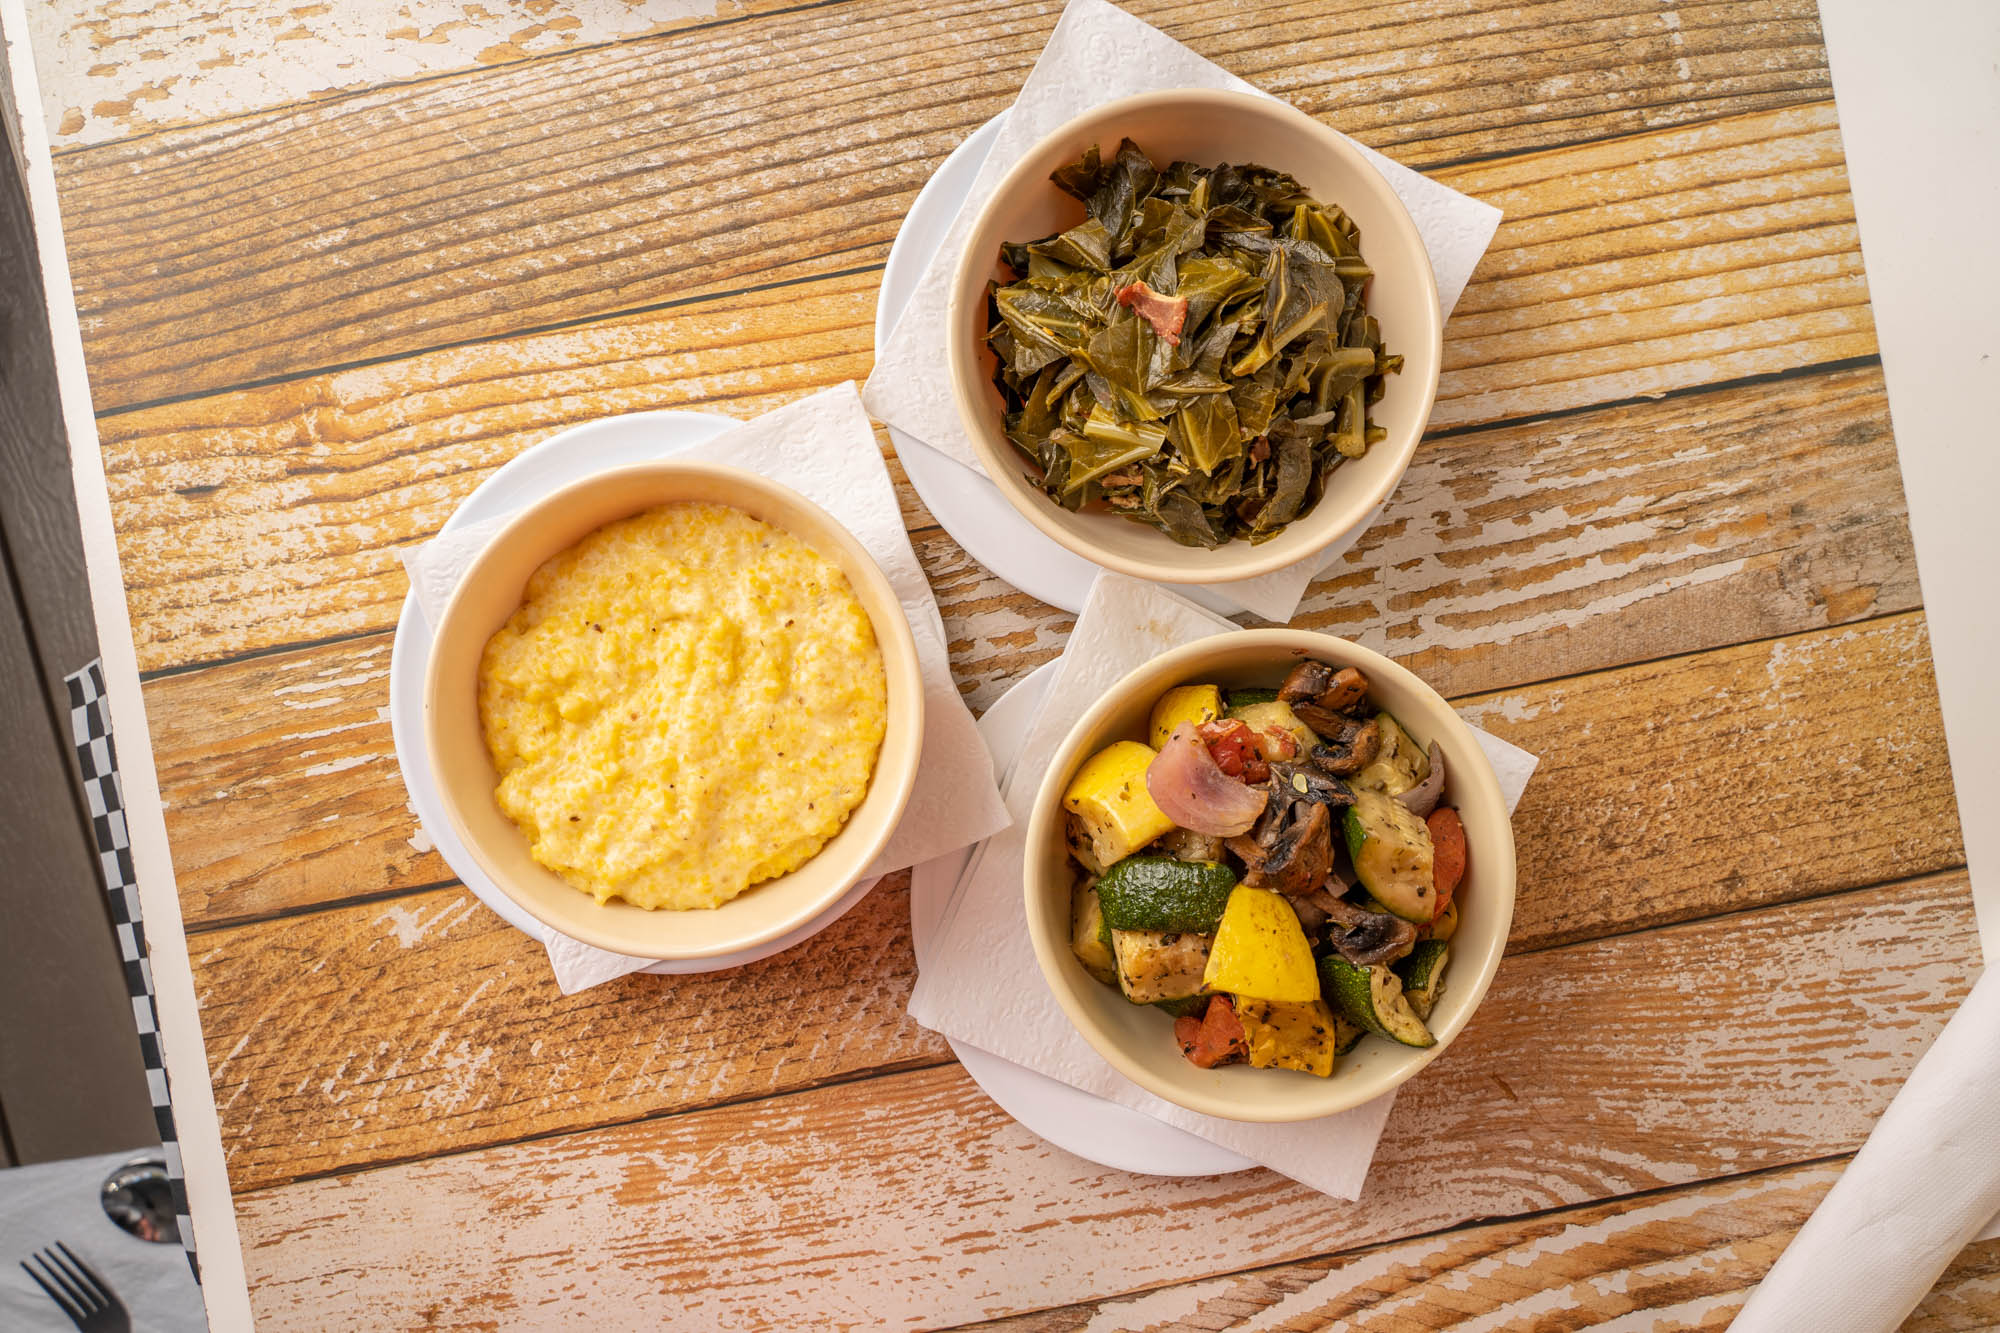 Creamy stone ground grits, collards and roasted veggies, top view